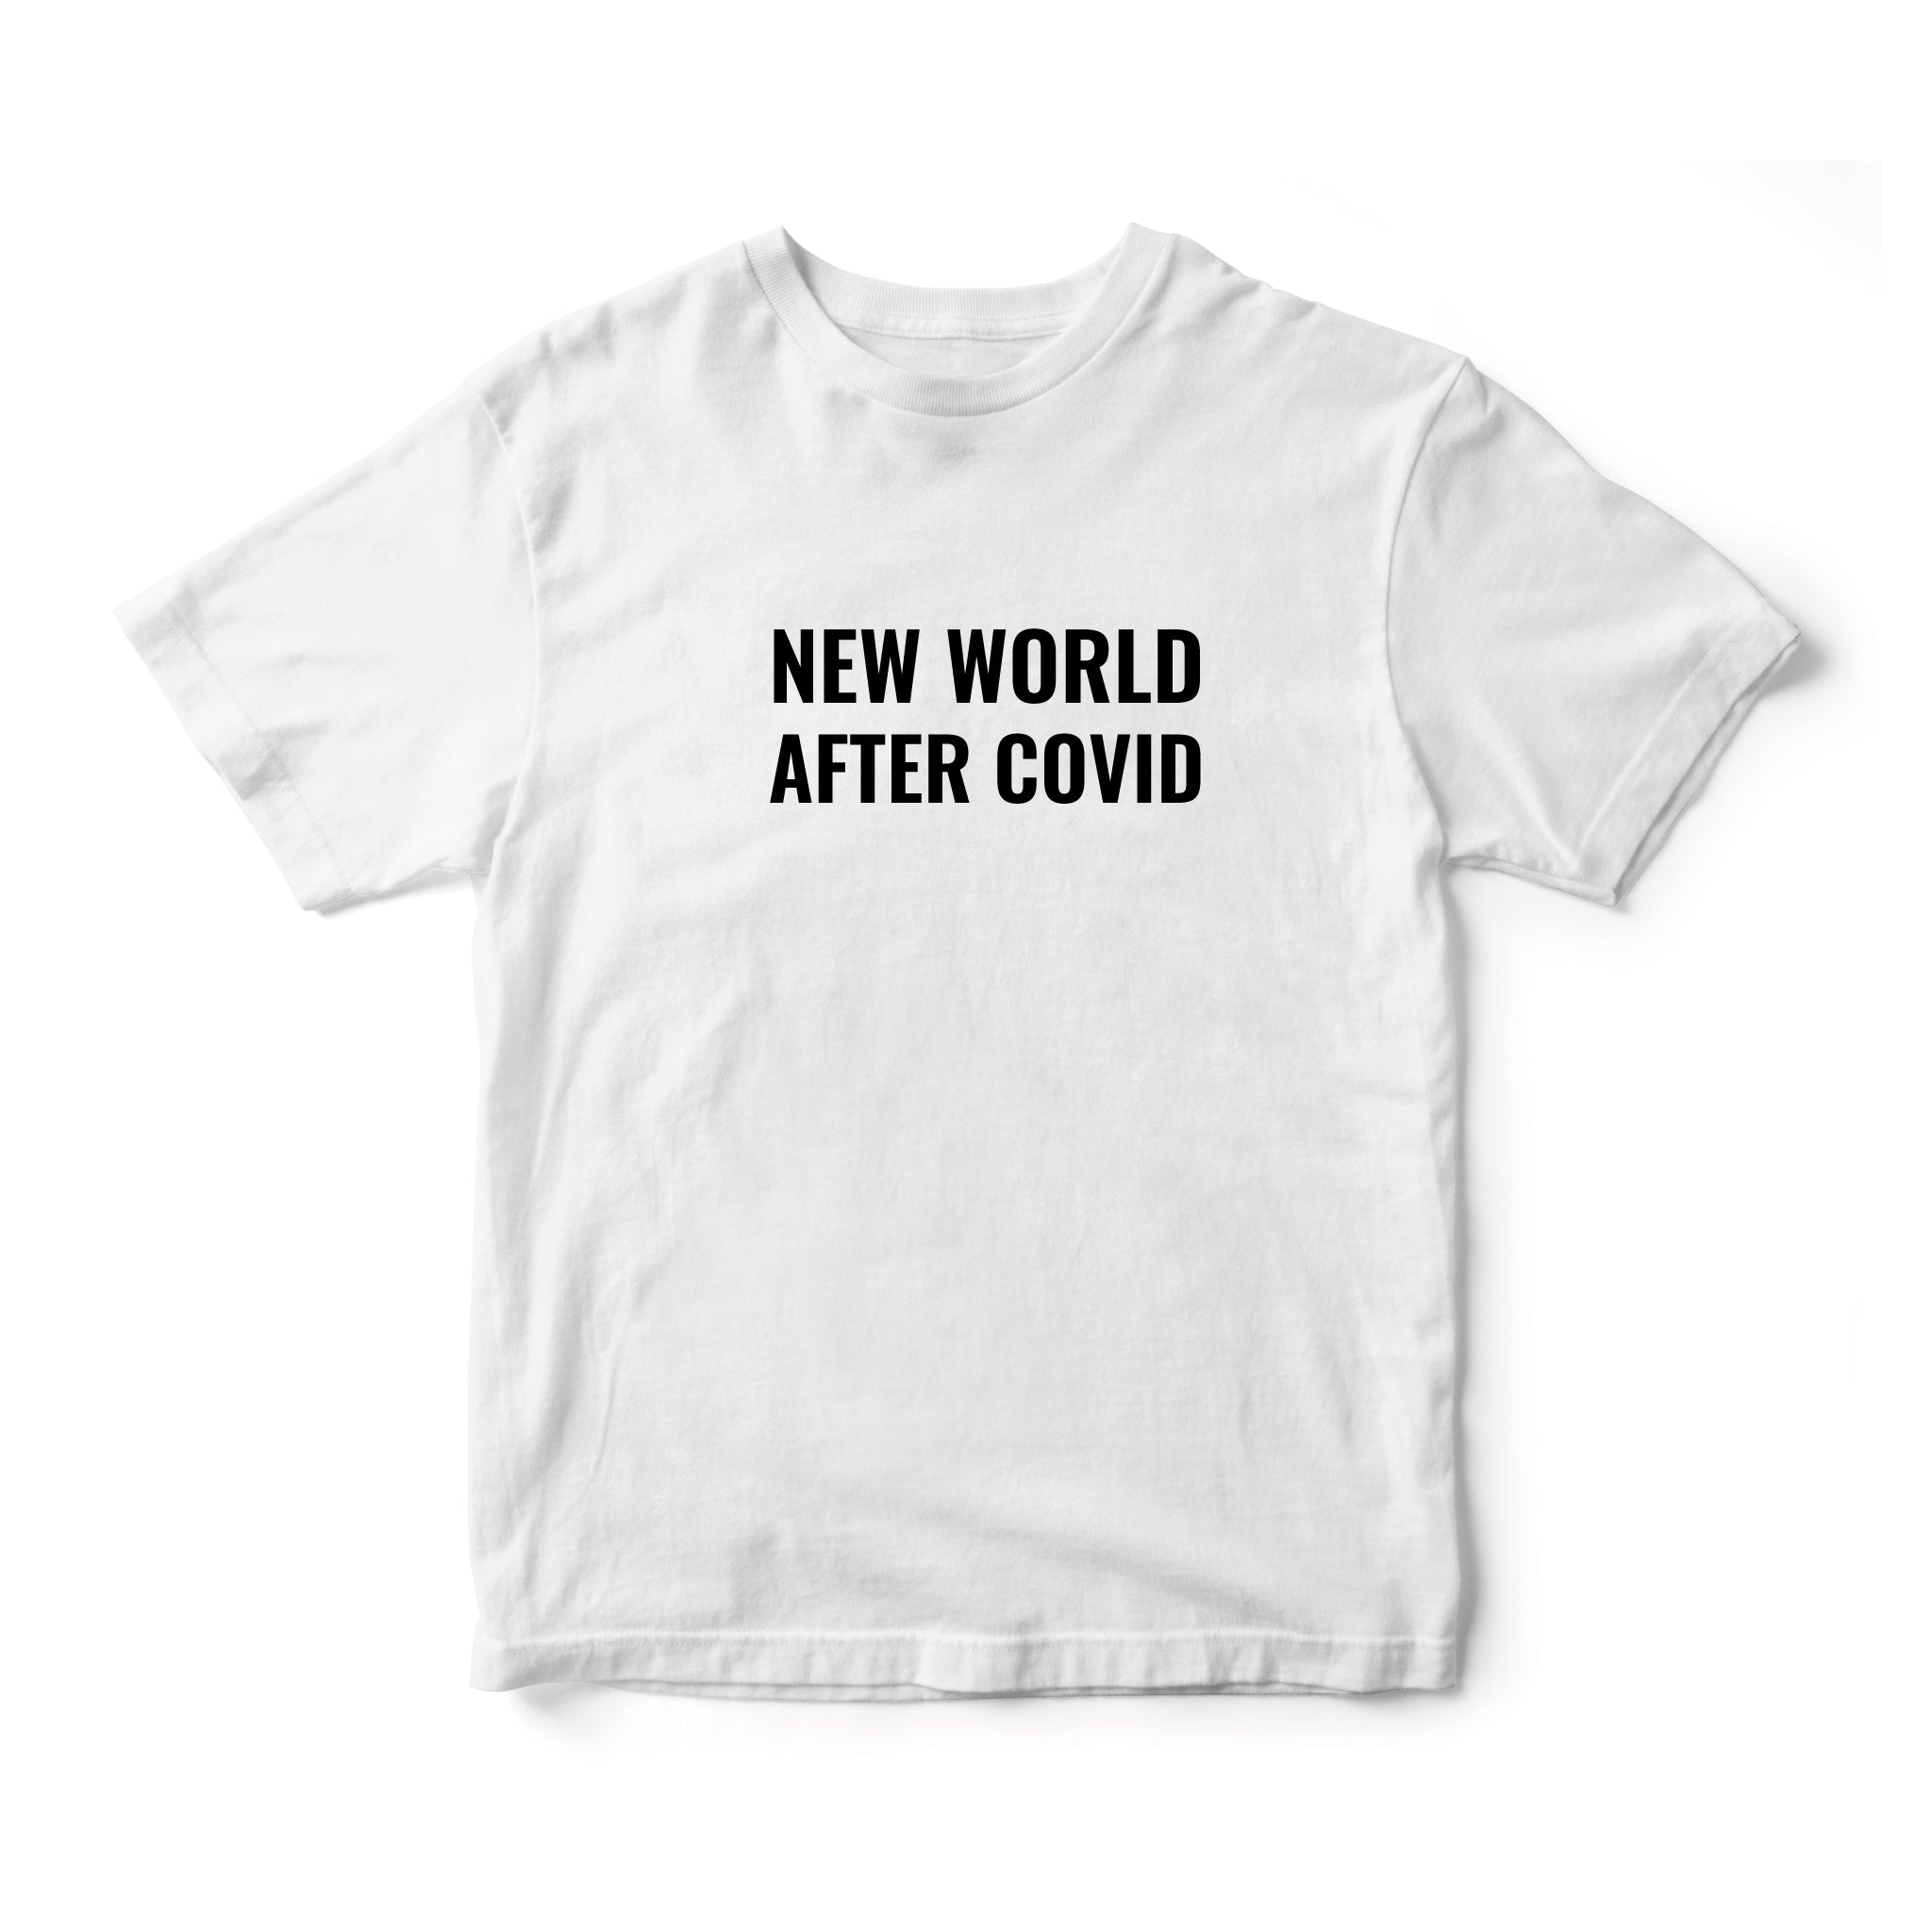 Instee New World After Covid T-shirt Unisex 100% Cotton